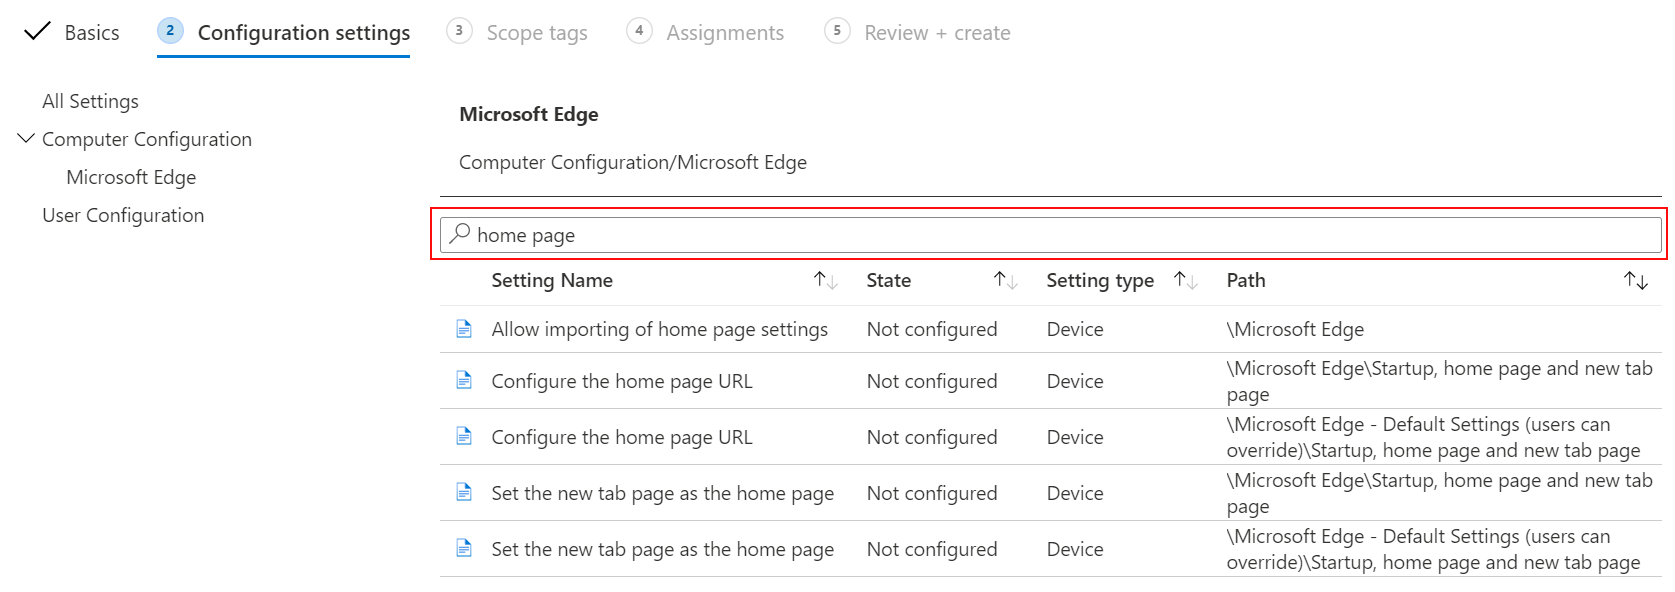 Screenshot of Use the search to filter ADMX settings in Microsoft Intune and Intune admin center.